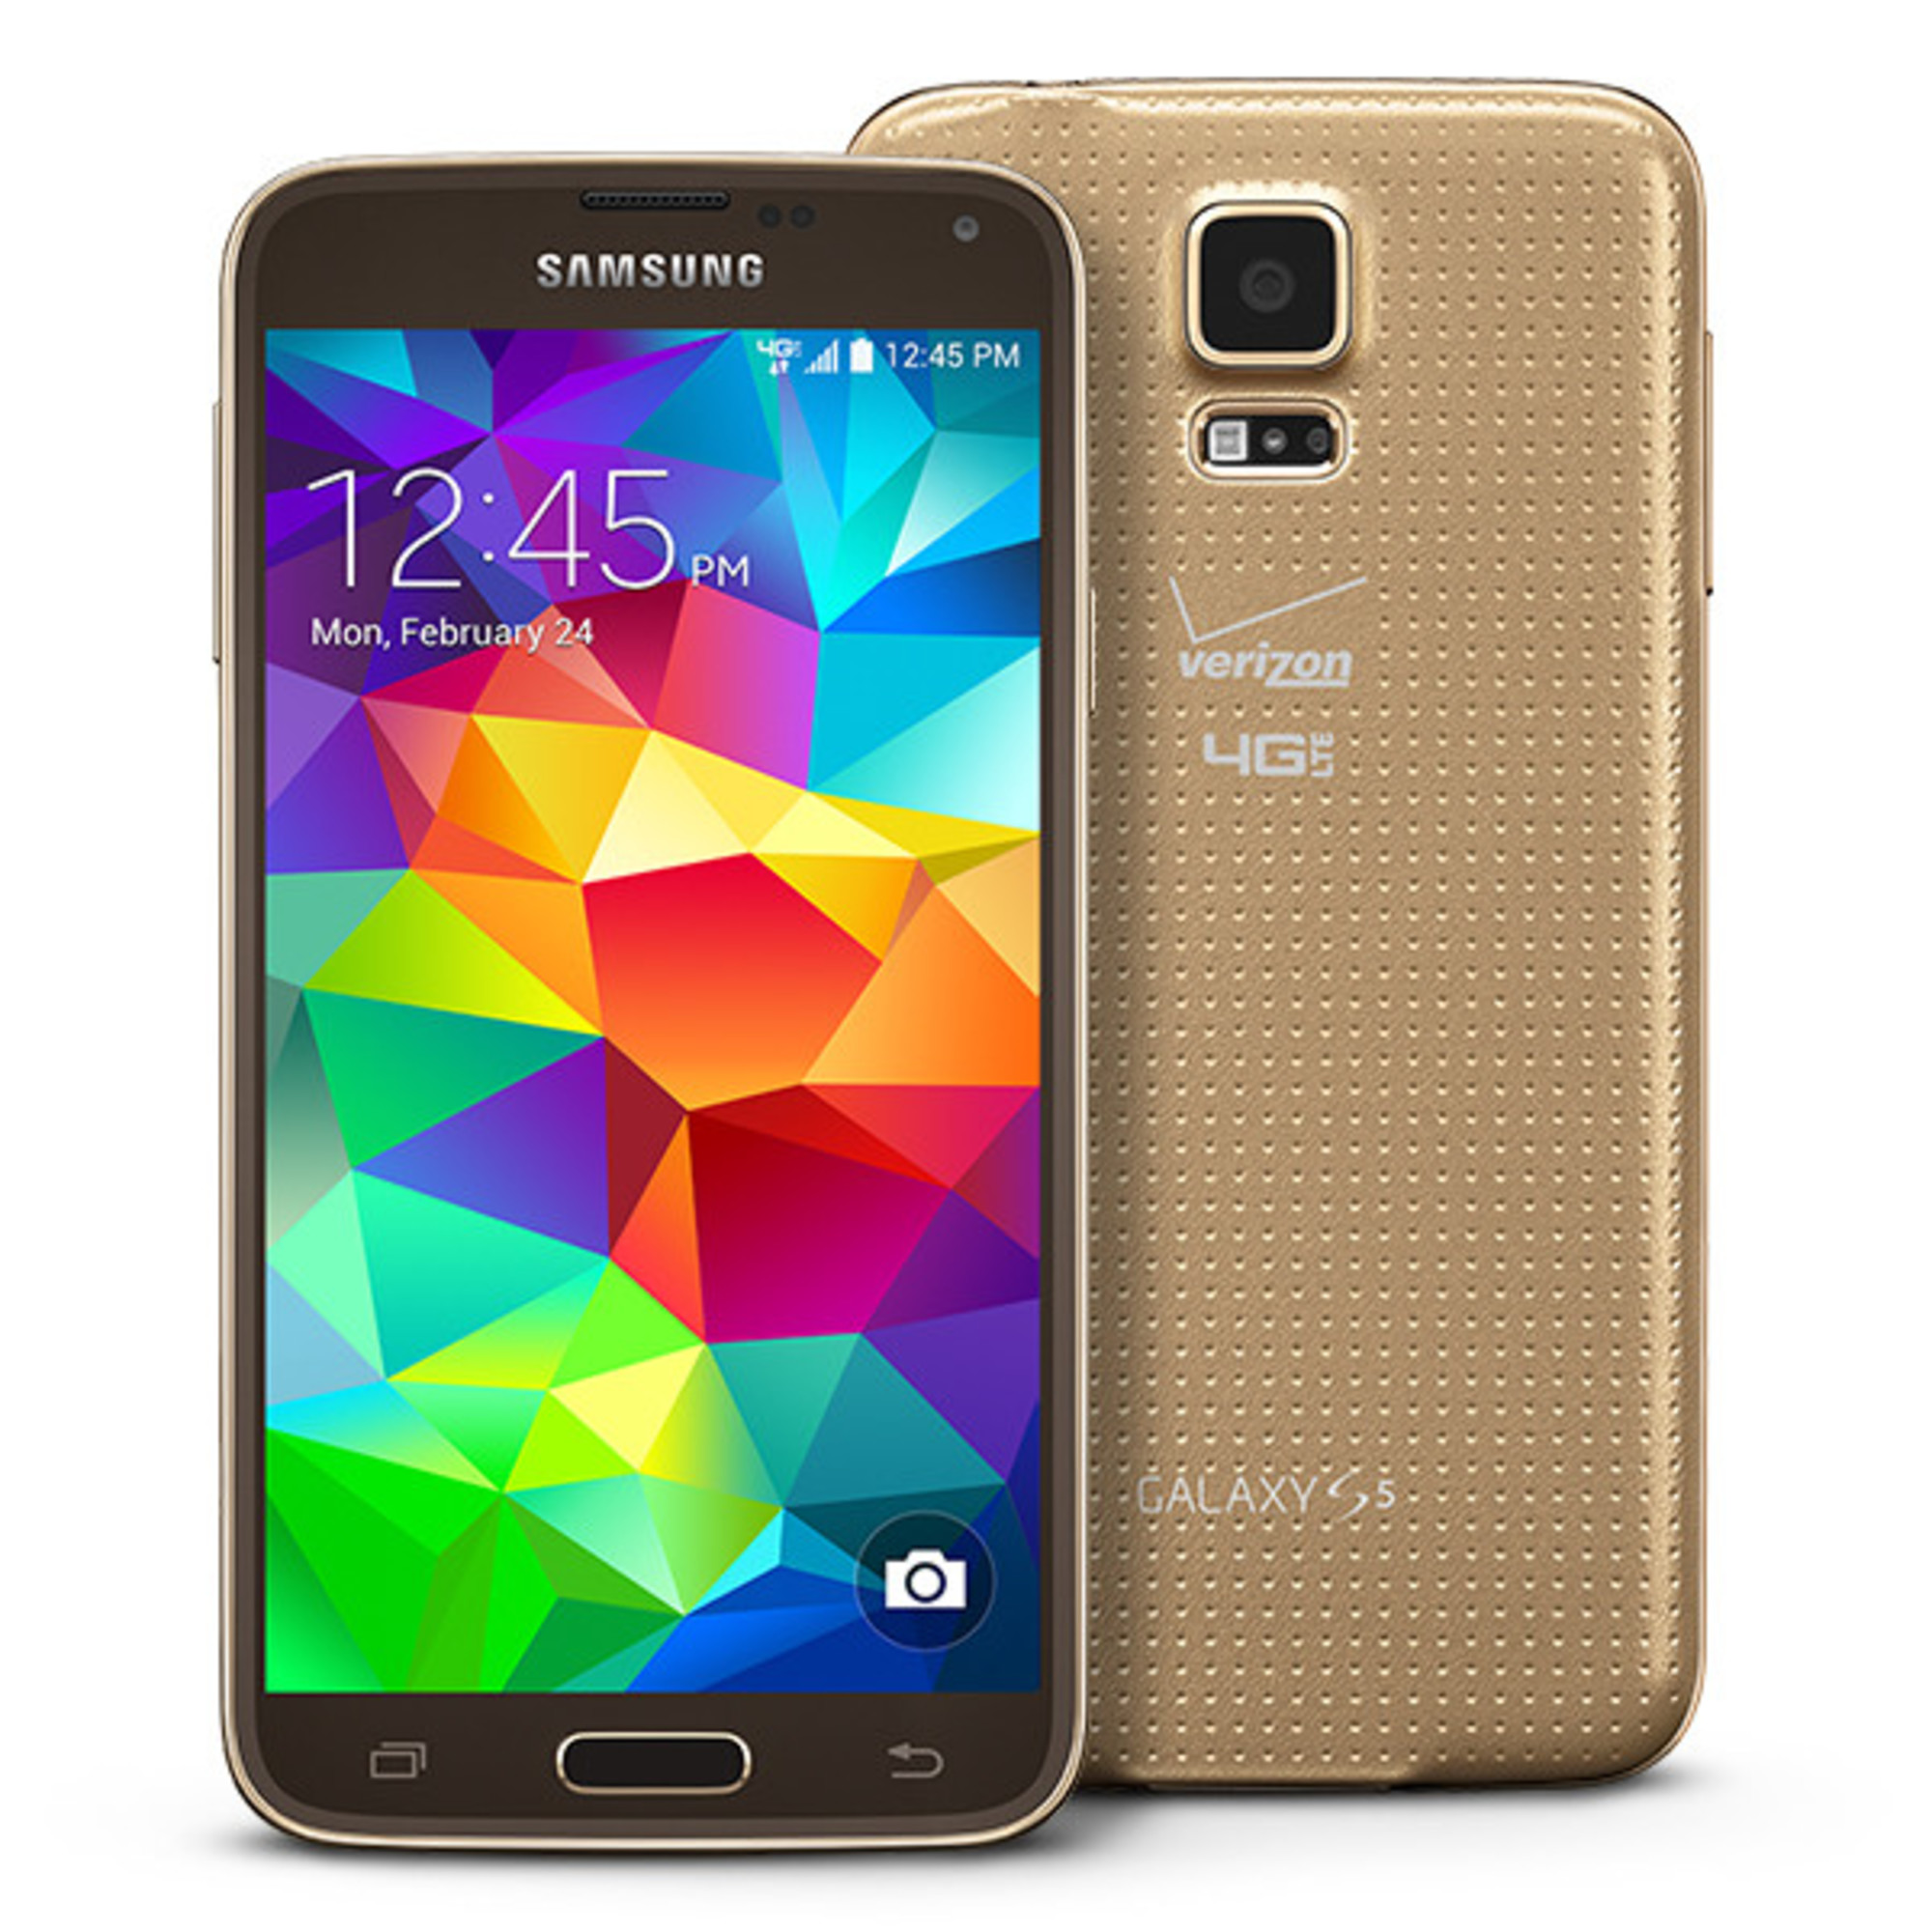 Samsung Galaxy S5 (Gold) - Full Specs and more | Samsung UK